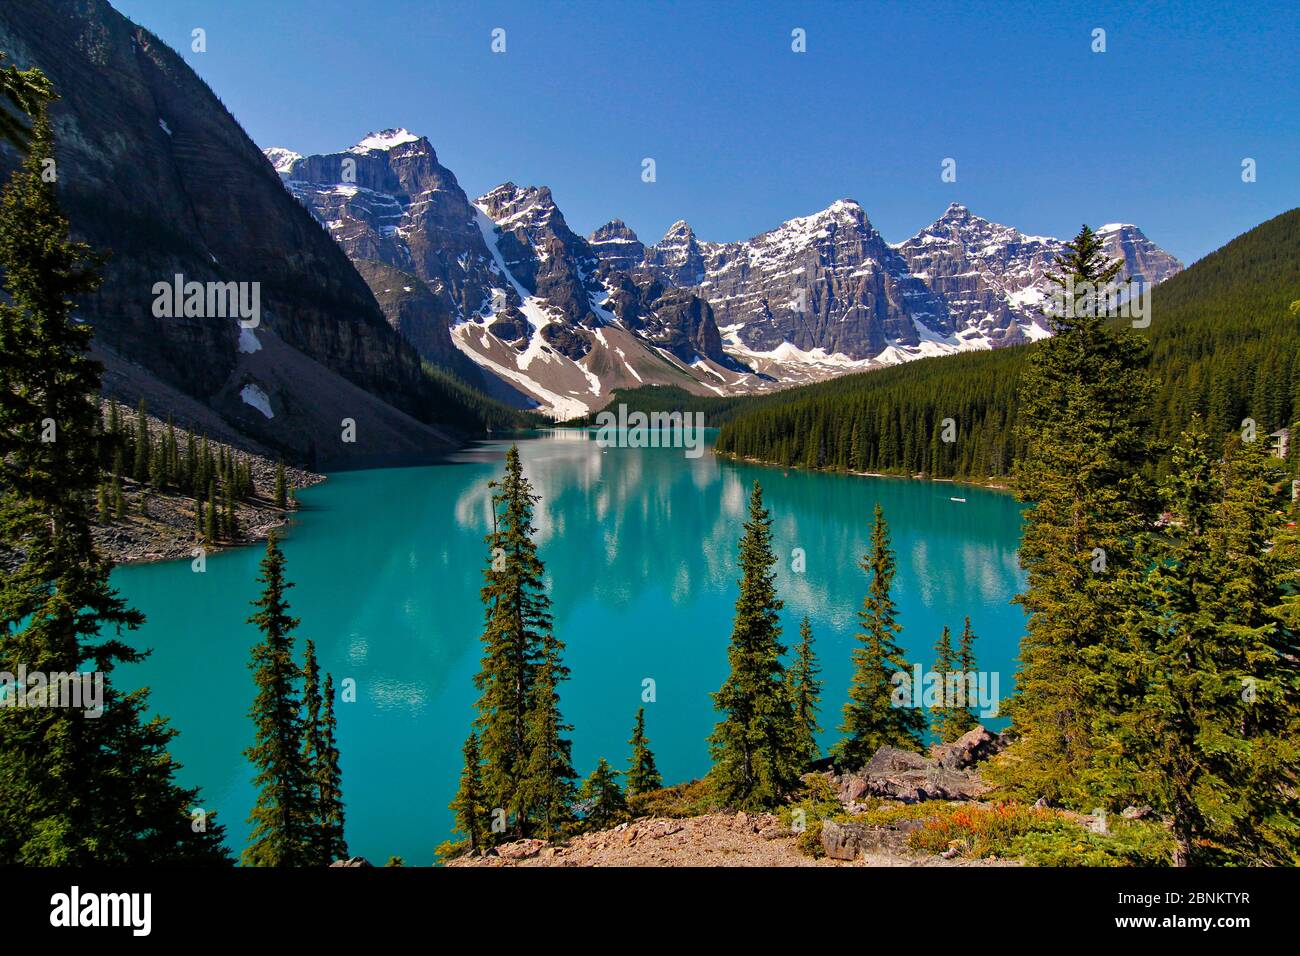 Moraine Lake, Valley of the Ten Peaks, Banff National Park, Alberta, Rocky Mountains, Canada Foto Stock